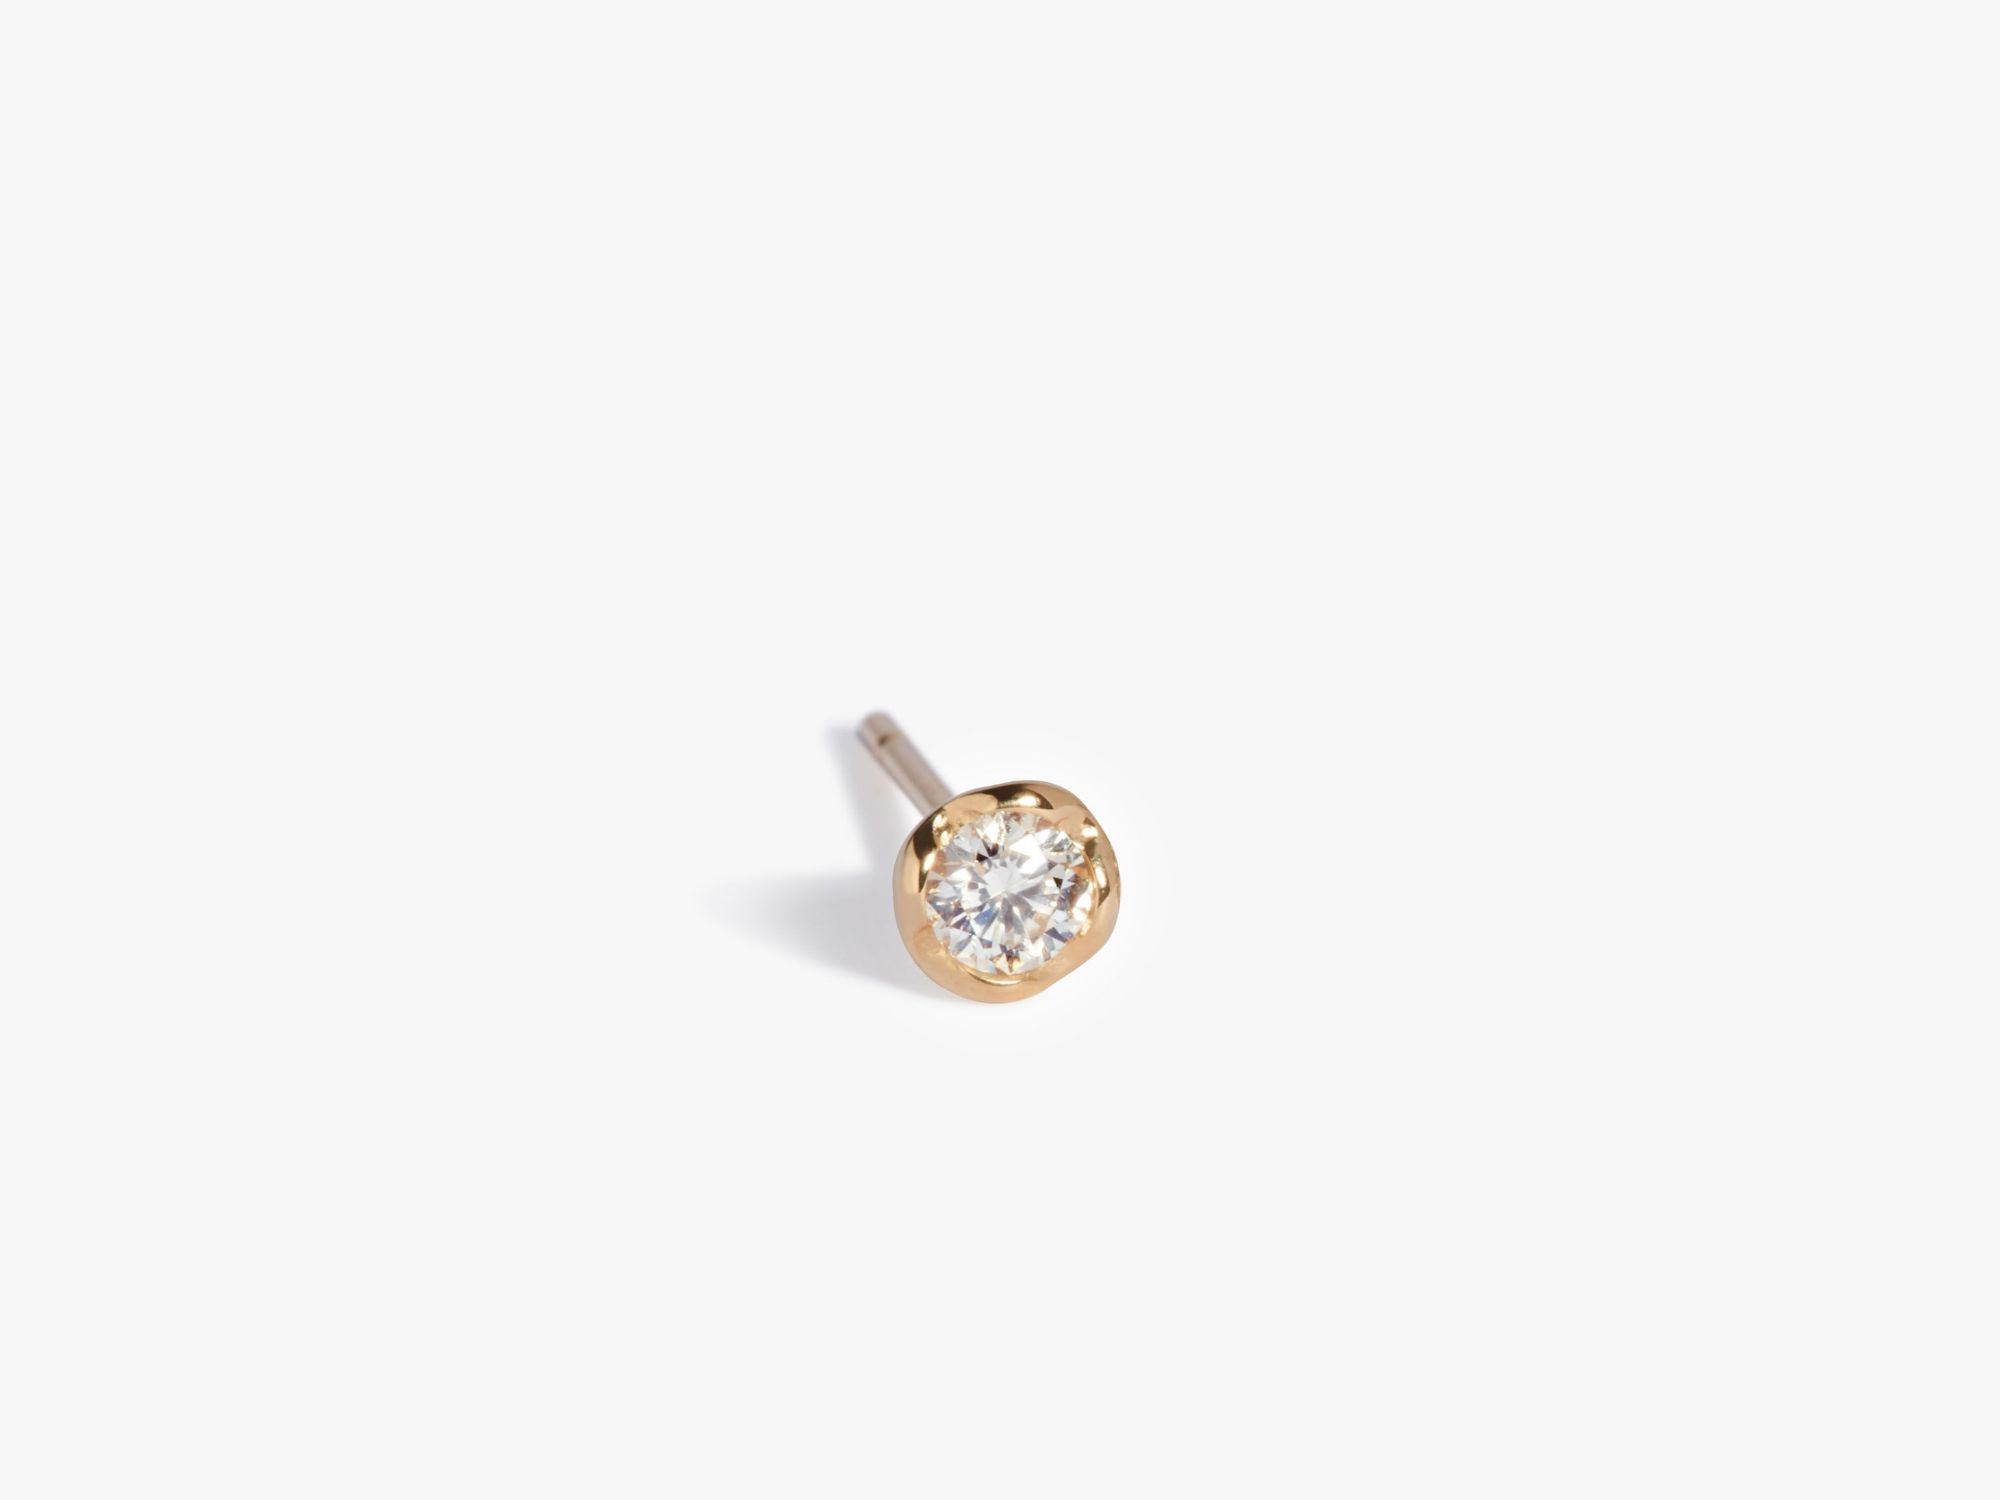 Whoopsie Daisy Solitaire Stud Earring